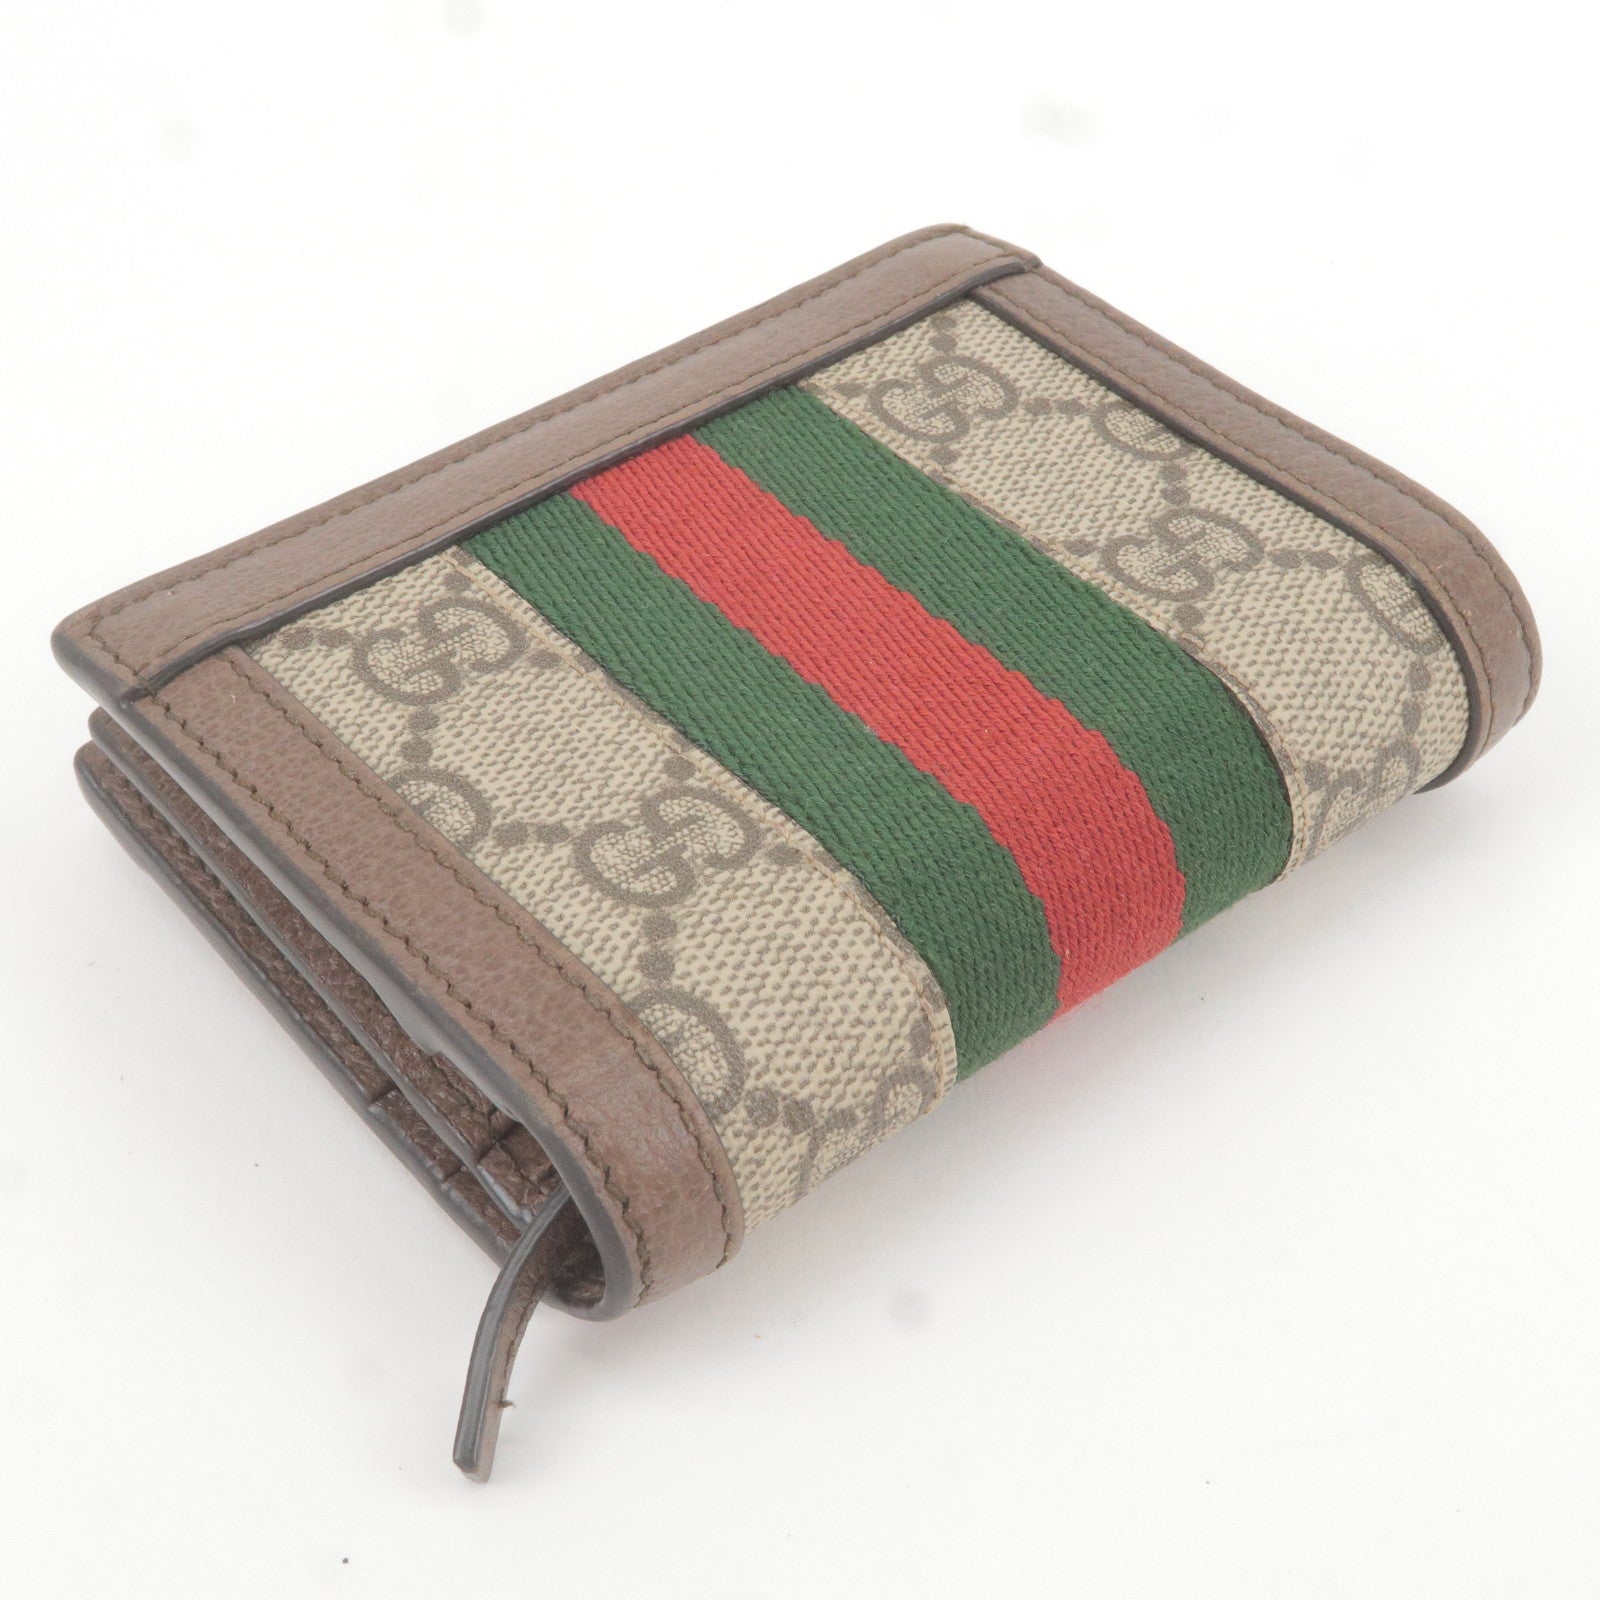 Ophidia GG Canvas Wallet in Blue - Gucci